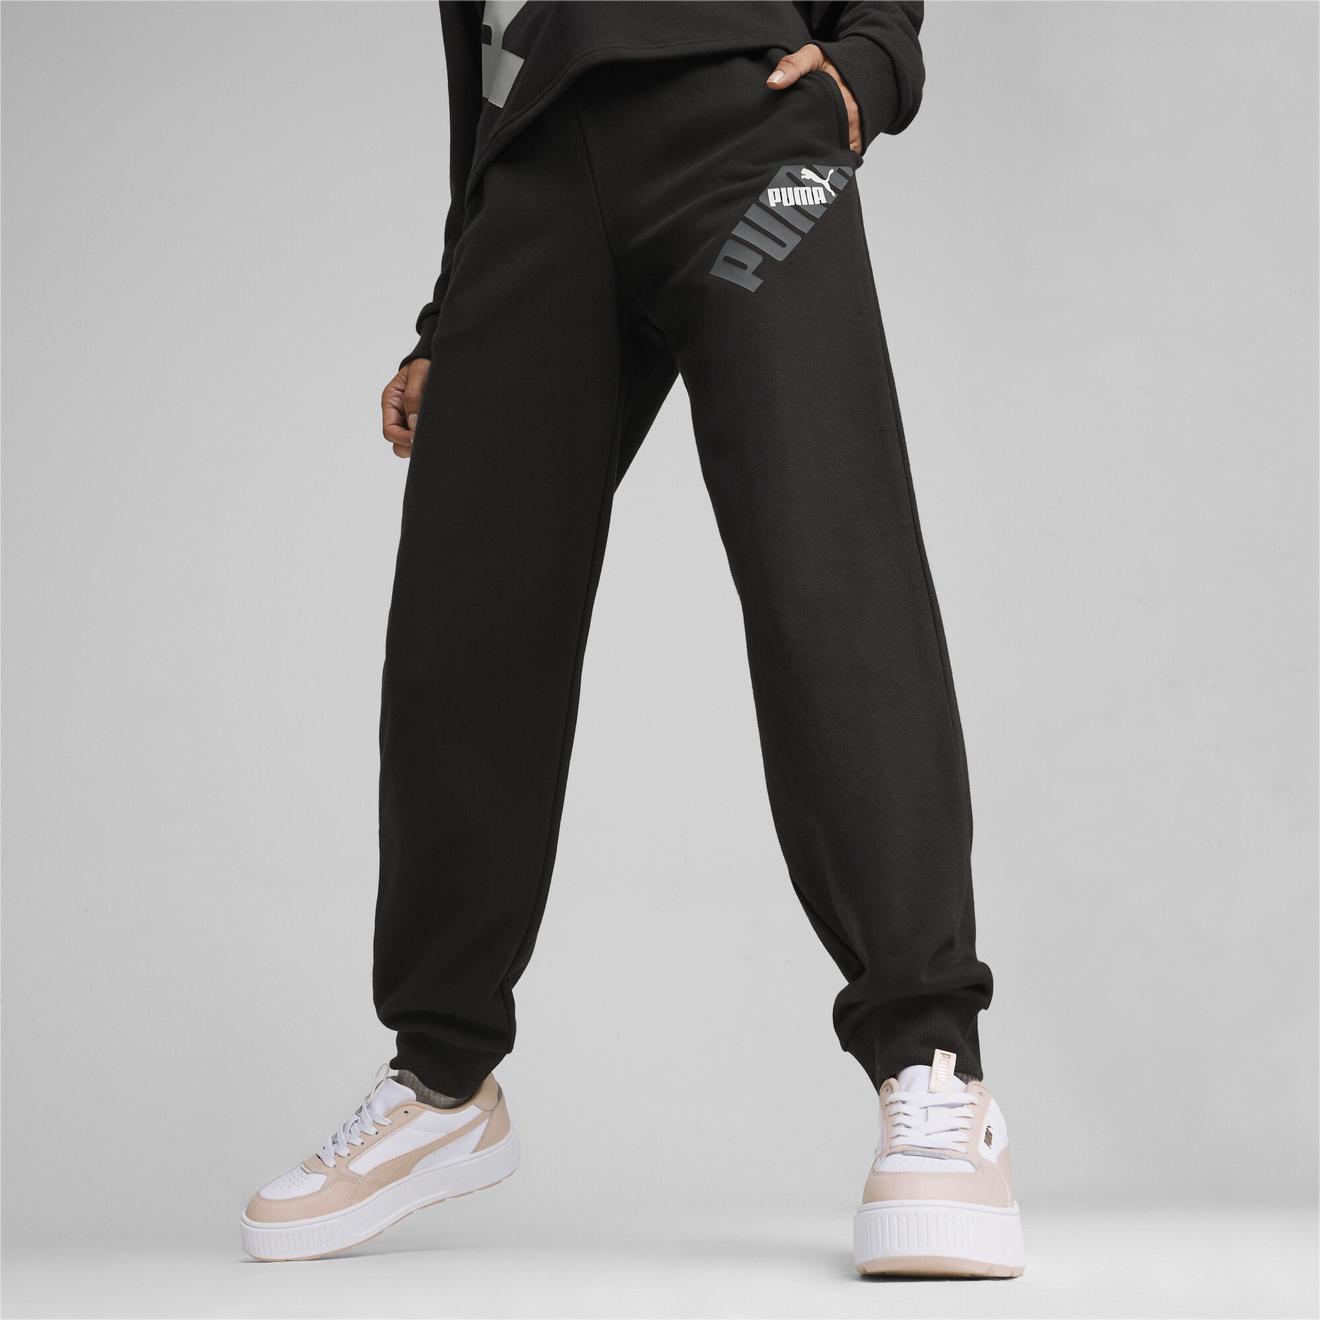 PUMA POWER Women's Pants offers at 199 Dhs in Puma